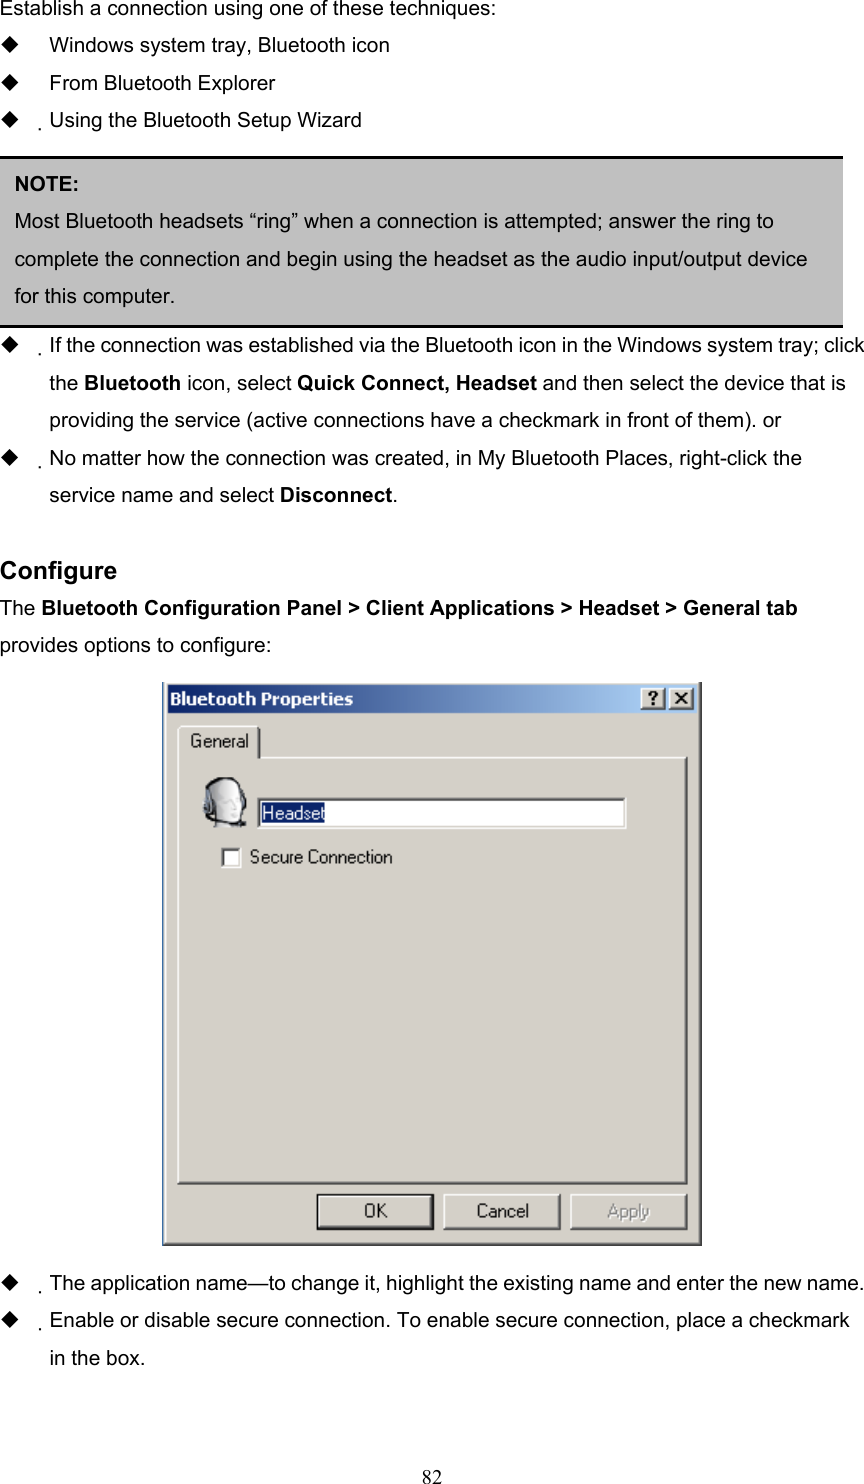  82 Establish a connection using one of these techniques:   Windows system tray, Bluetooth icon   From Bluetooth Explorer   Using the Bluetooth Setup Wizard     Close a Headset connection   If the connection was established via the Bluetooth icon in the Windows system tray; click the Bluetooth icon, select Quick Connect, Headset and then select the device that is providing the service (active connections have a checkmark in front of them). or   No matter how the connection was created, in My Bluetooth Places, right-click the service name and select Disconnect.  Configure The Bluetooth Configuration Panel &gt; Client Applications &gt; Headset &gt; General tab provides options to configure:    The application name—to change it, highlight the existing name and enter the new name.   Enable or disable secure connection. To enable secure connection, place a checkmark in the box.  NOTE:  Most Bluetooth headsets “ring” when a connection is attempted; answer the ring to complete the connection and begin using the headset as the audio input/output device for this computer.   